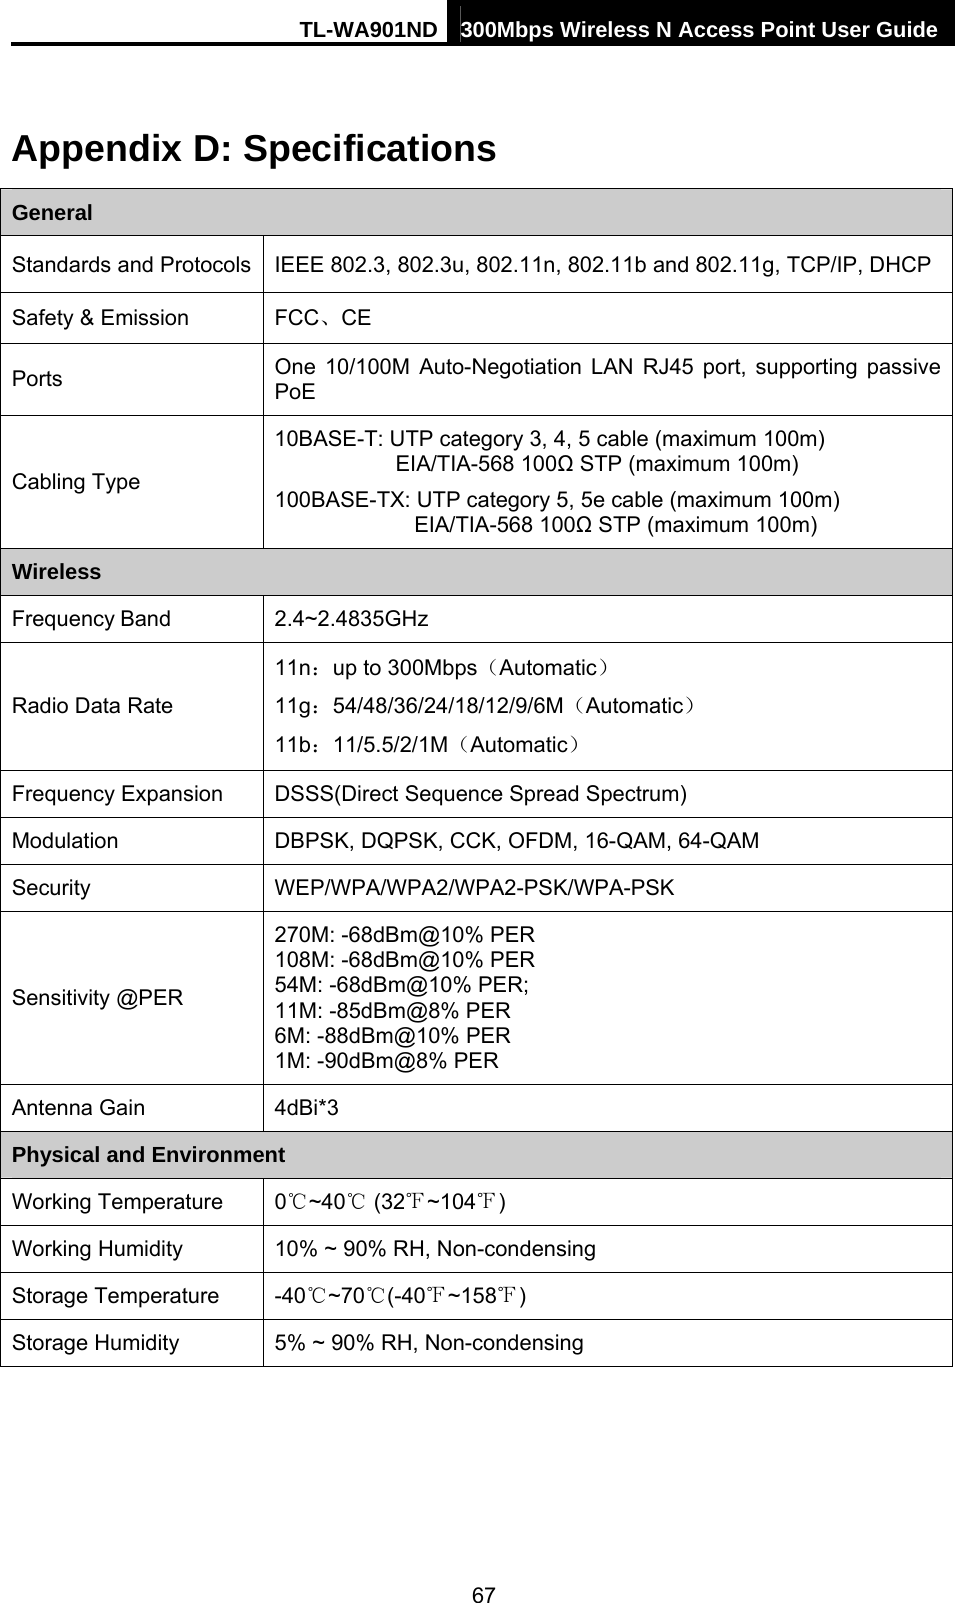 TL-WA901ND 300Mbps Wireless N Access Point User Guide Appendix D: Specifications General Standards and Protocols  IEEE 802.3, 802.3u, 802.11n, 802.11b and 802.11g, TCP/IP, DHCP Safety &amp; Emission  FCC、CE Ports  One 10/100M Auto-Negotiation LAN RJ45 port, supporting passive PoE Cabling Type 10BASE-T: UTP category 3, 4, 5 cable (maximum 100m) EIA/TIA-568 100Ω STP (maximum 100m) 100BASE-TX: UTP category 5, 5e cable (maximum 100m) EIA/TIA-568 100Ω STP (maximum 100m) Wireless Frequency Band 2.4~2.4835GHz Radio Data Rate 11n：up to 300Mbps（Automatic） 11g：54/48/36/24/18/12/9/6M（Automatic） 11b：11/5.5/2/1M（Automatic） Frequency Expansion  DSSS(Direct Sequence Spread Spectrum) Modulation  DBPSK, DQPSK, CCK, OFDM, 16-QAM, 64-QAM Security WEP/WPA/WPA2/WPA2-PSK/WPA-PSK Sensitivity @PER 270M: -68dBm@10% PER 108M: -68dBm@10% PER   54M: -68dBm@10% PER; 11M: -85dBm@8% PER 6M: -88dBm@10% PER 1M: -90dBm@8% PER Antenna Gain  4dBi*3 Physical and Environment Working Temperature 0℃~40  (32℃~104℉℉) Working Humidity  10% ~ 90% RH, Non-condensing Storage Temperature  -40 ~70 (℃℃-40 ~158℉)℉ Storage Humidity  5% ~ 90% RH, Non-condensing  67 